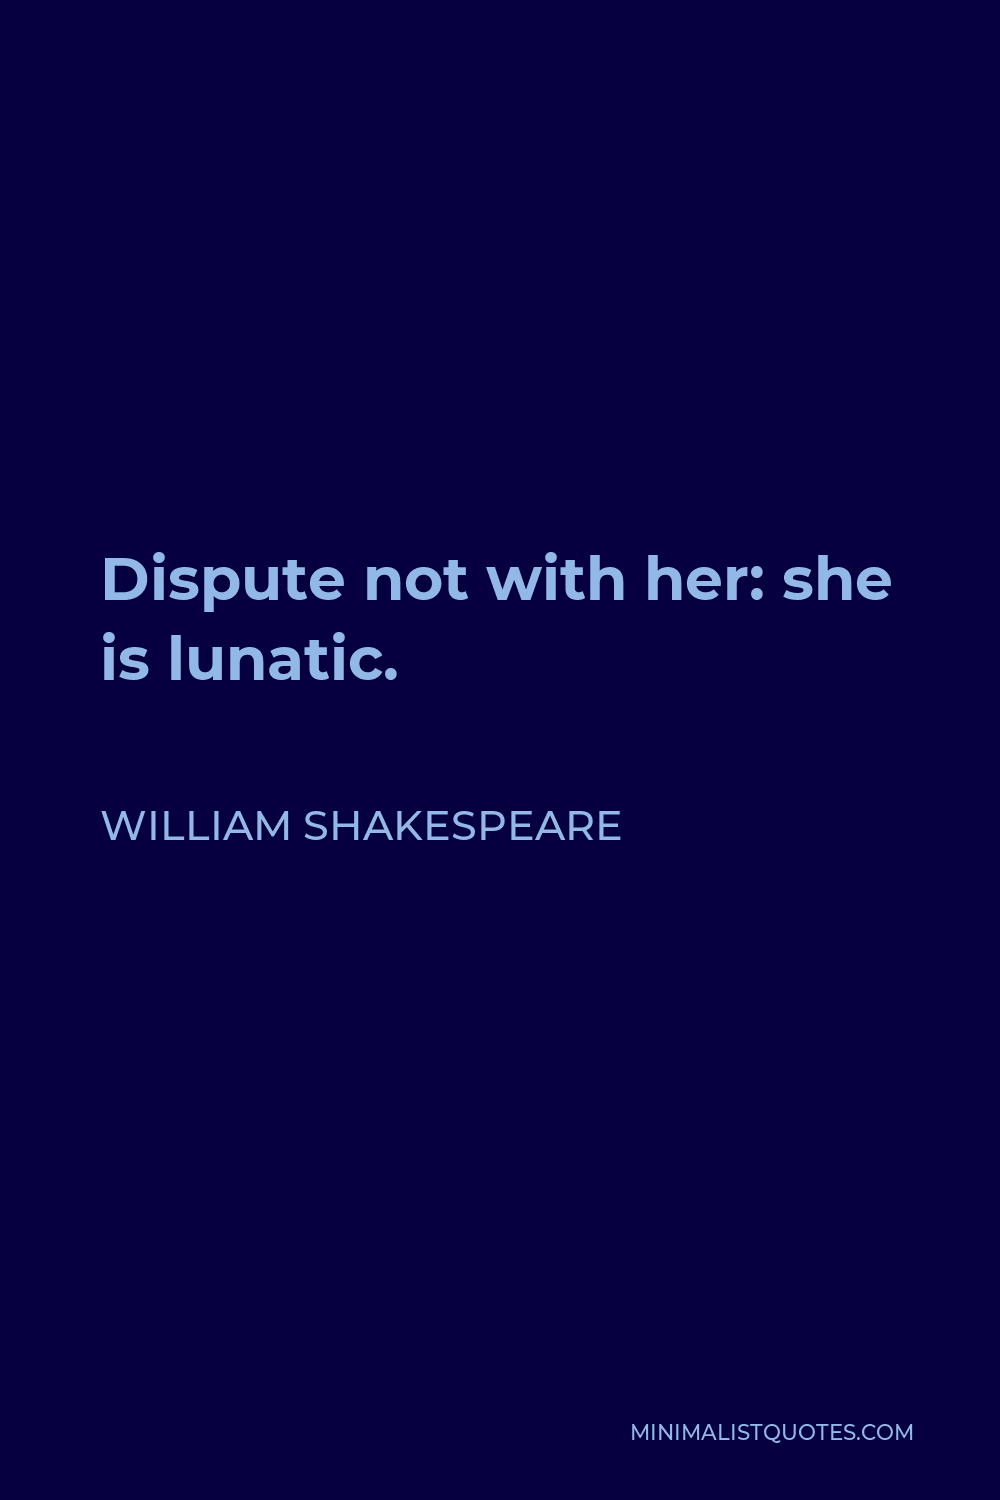 William Shakespeare Quote - Dispute not with her: she is lunatic.